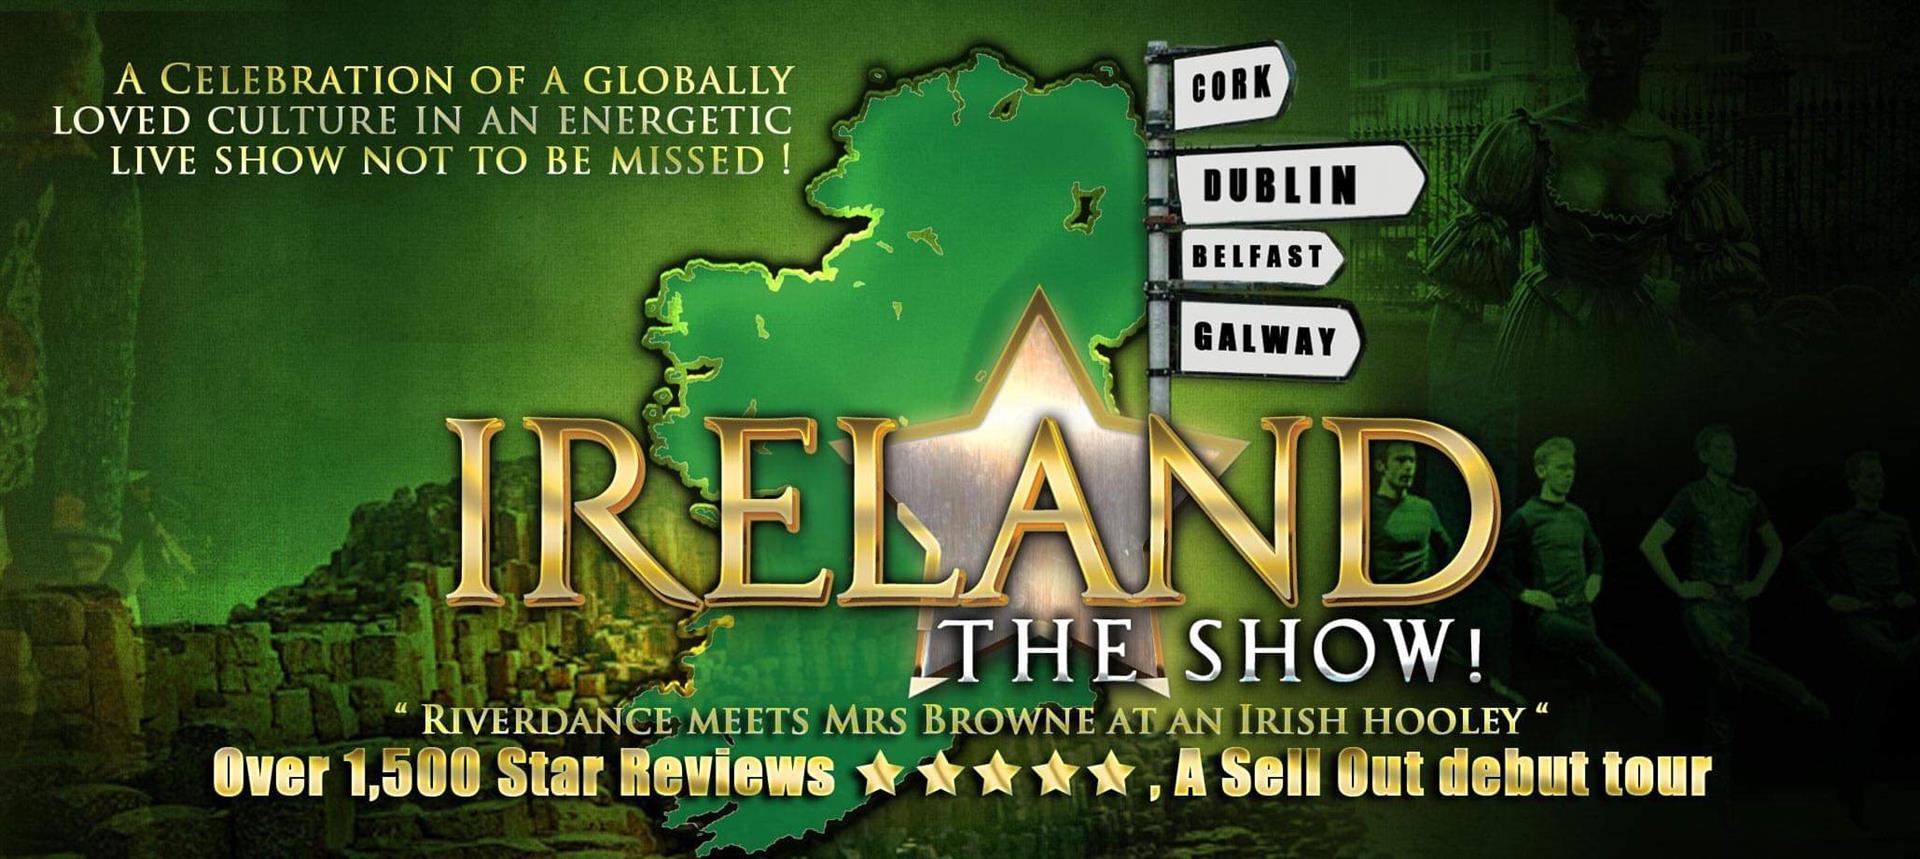 Ireland The Show! - Lowther Pavilion